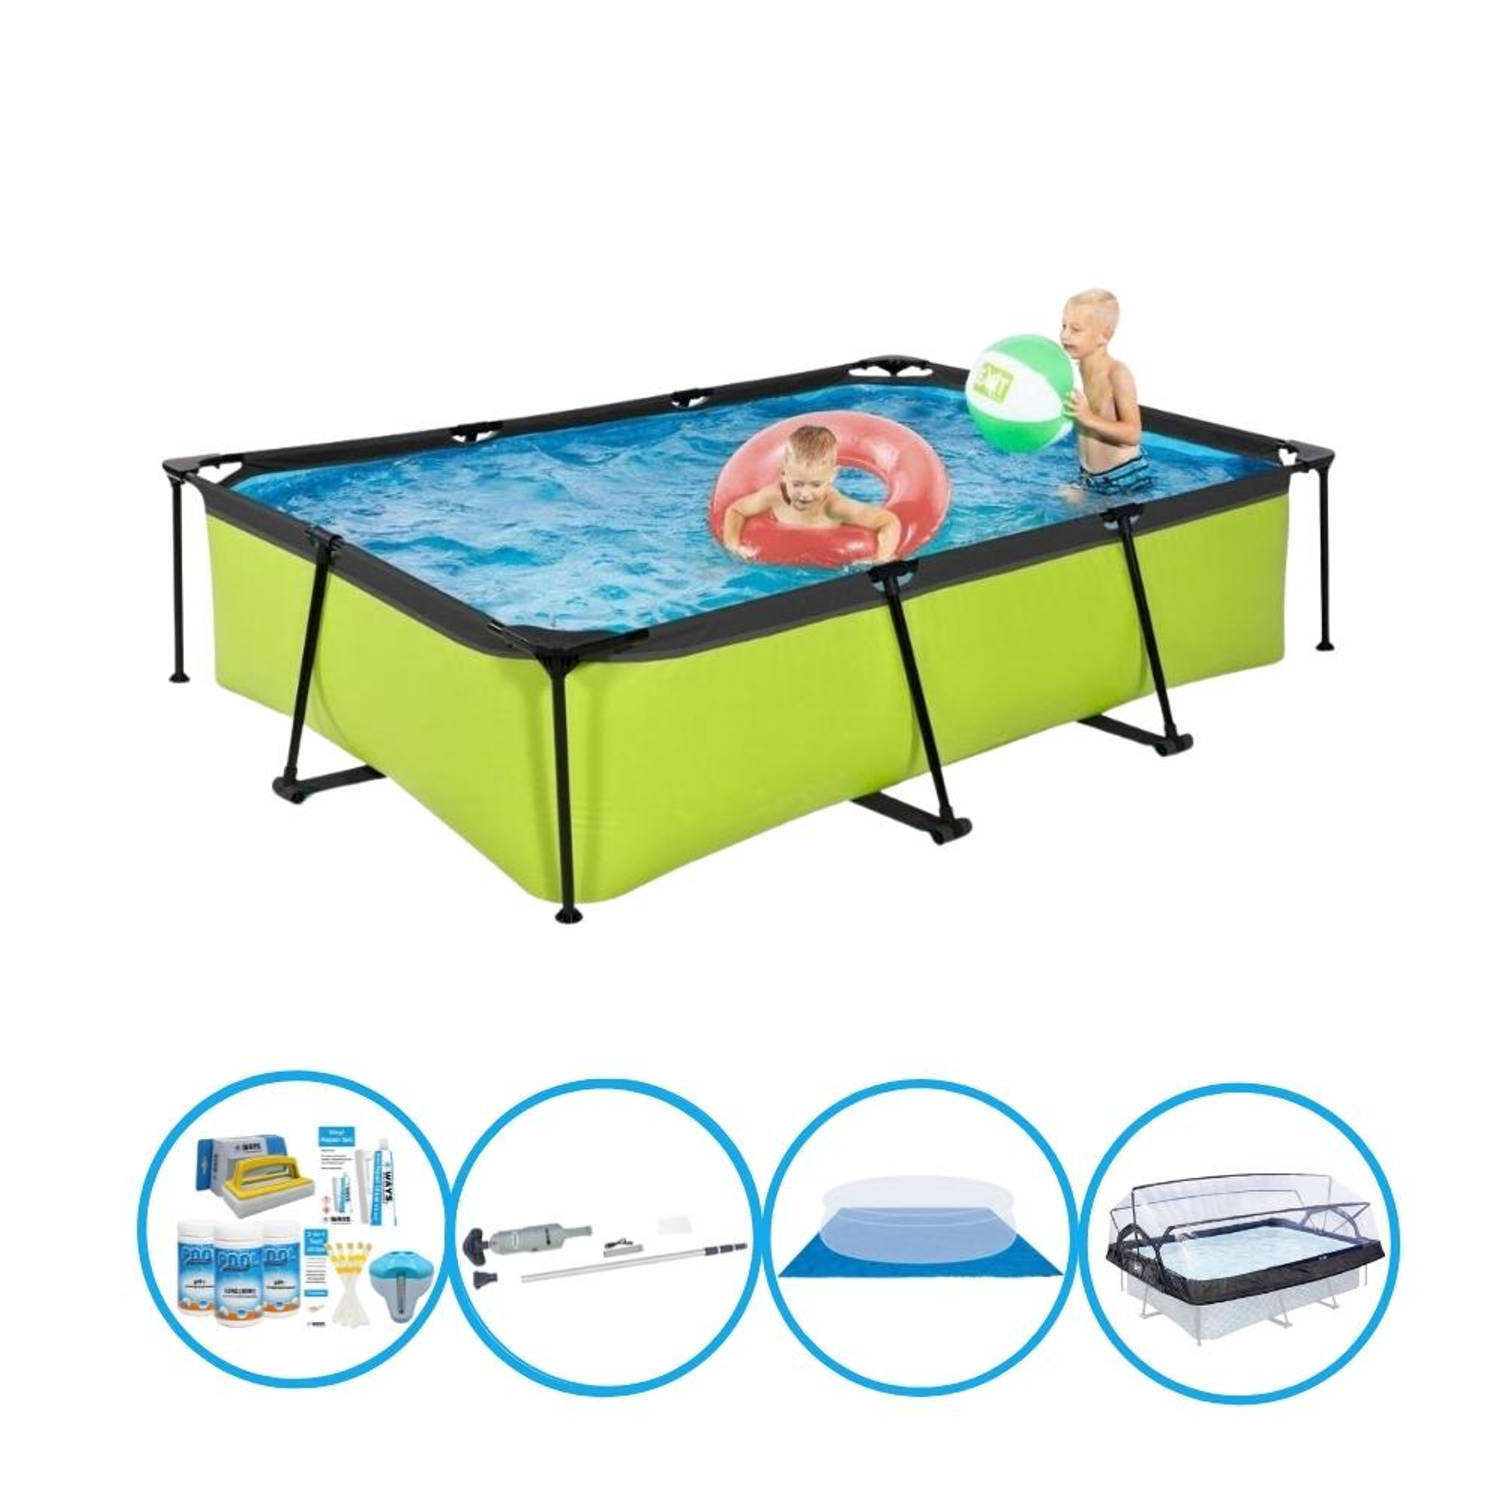 EXIT Zwembad Lime - 300x200x65 cm - Frame Pool - Complete zwembadset